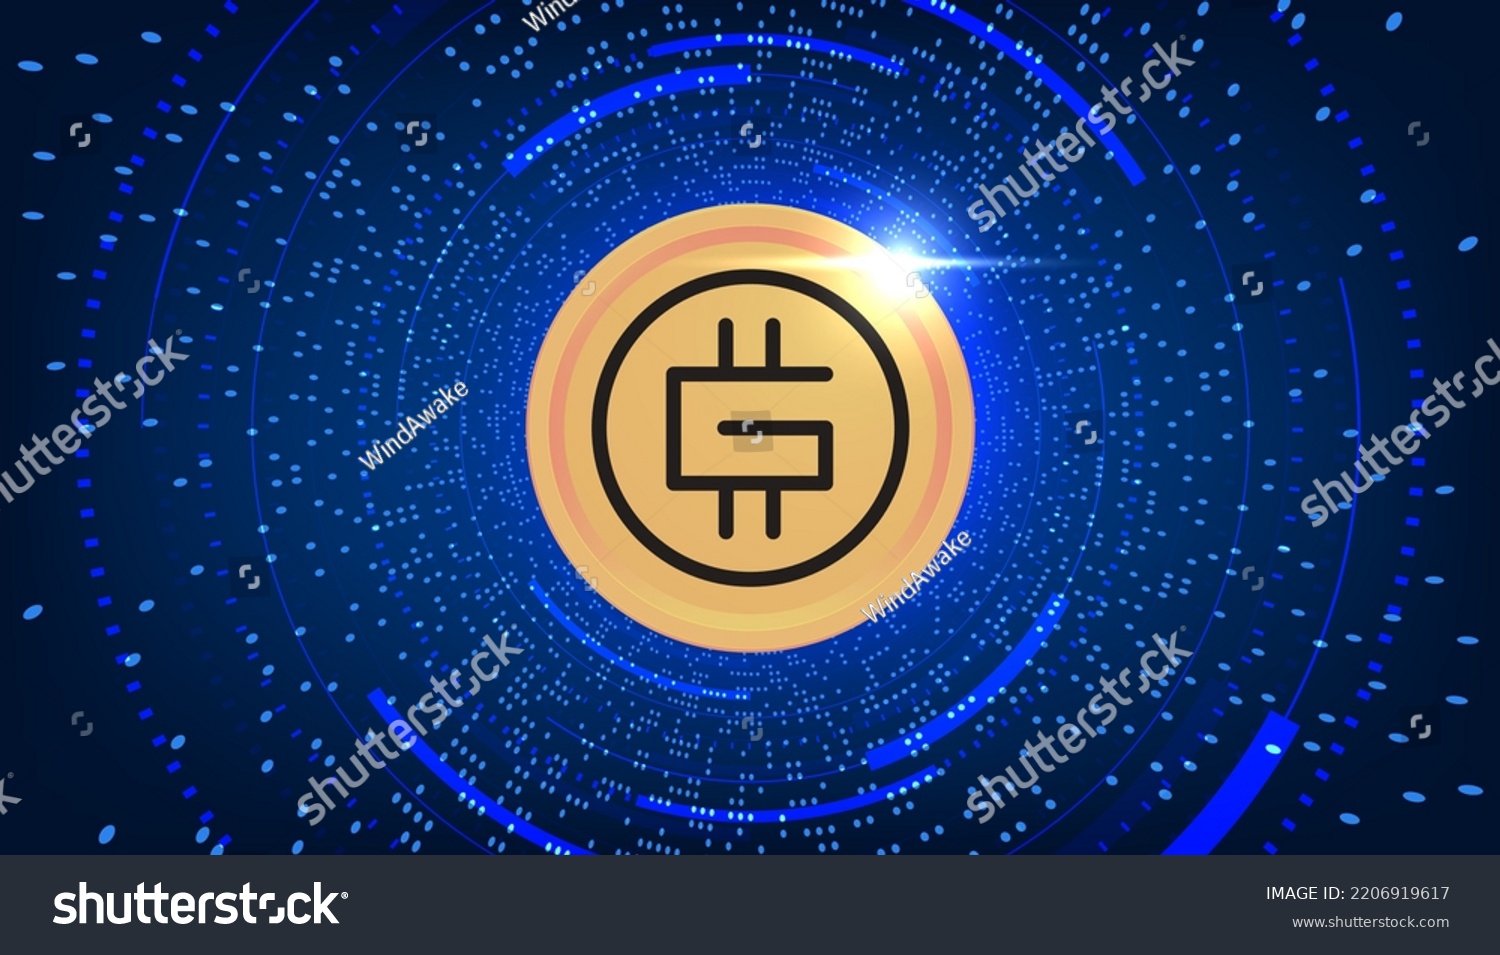 SVG of Green metaverse token (GMT) coin banner. GMT coin cryptocurrency concept banner background. svg